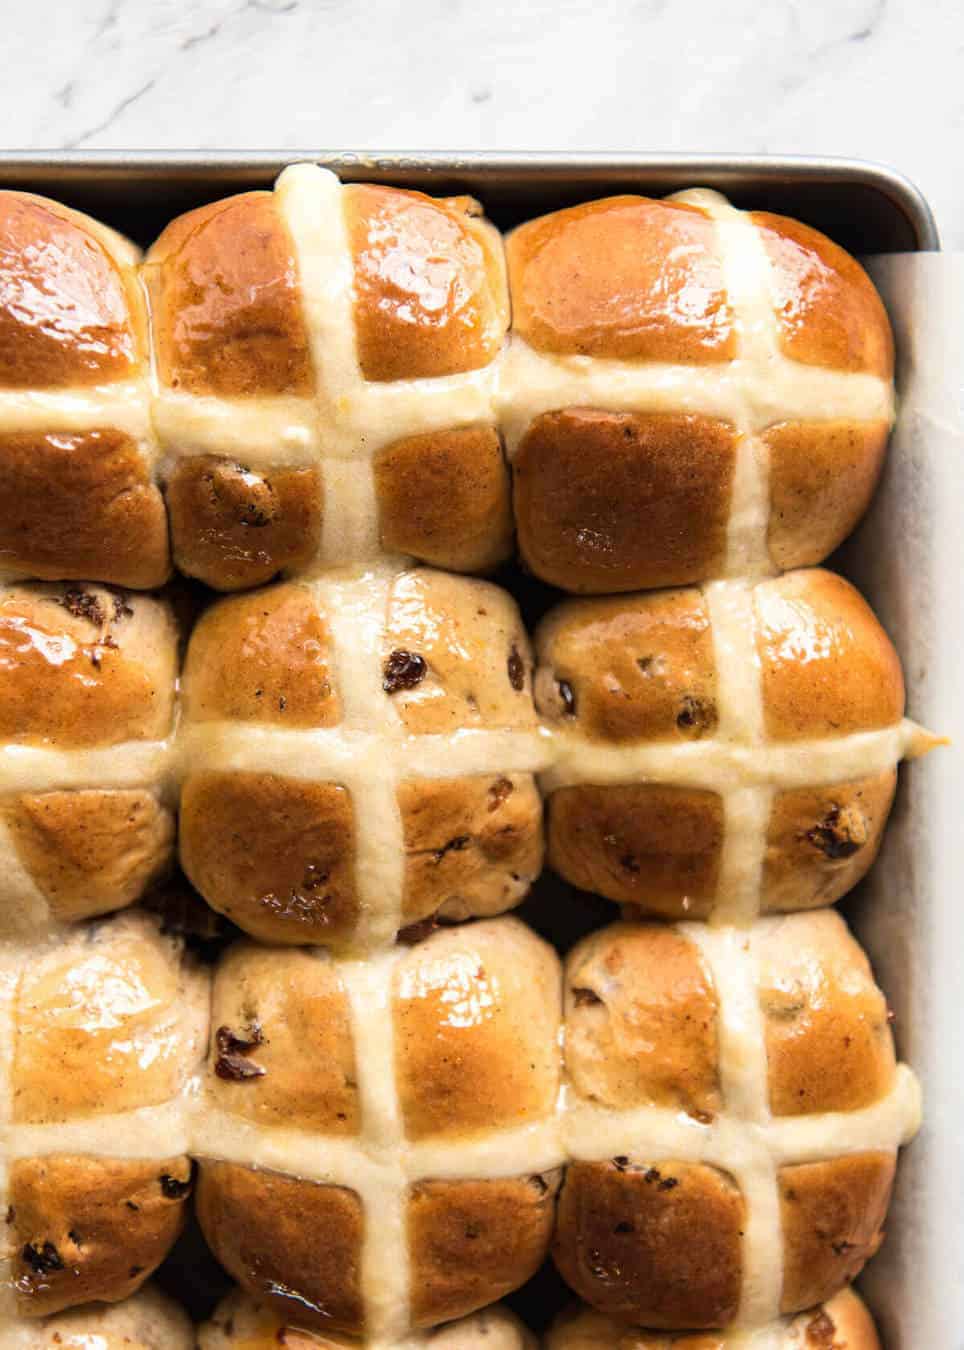 9 Homemade Hot Cross Buns photographed from overhead in a silver tray.